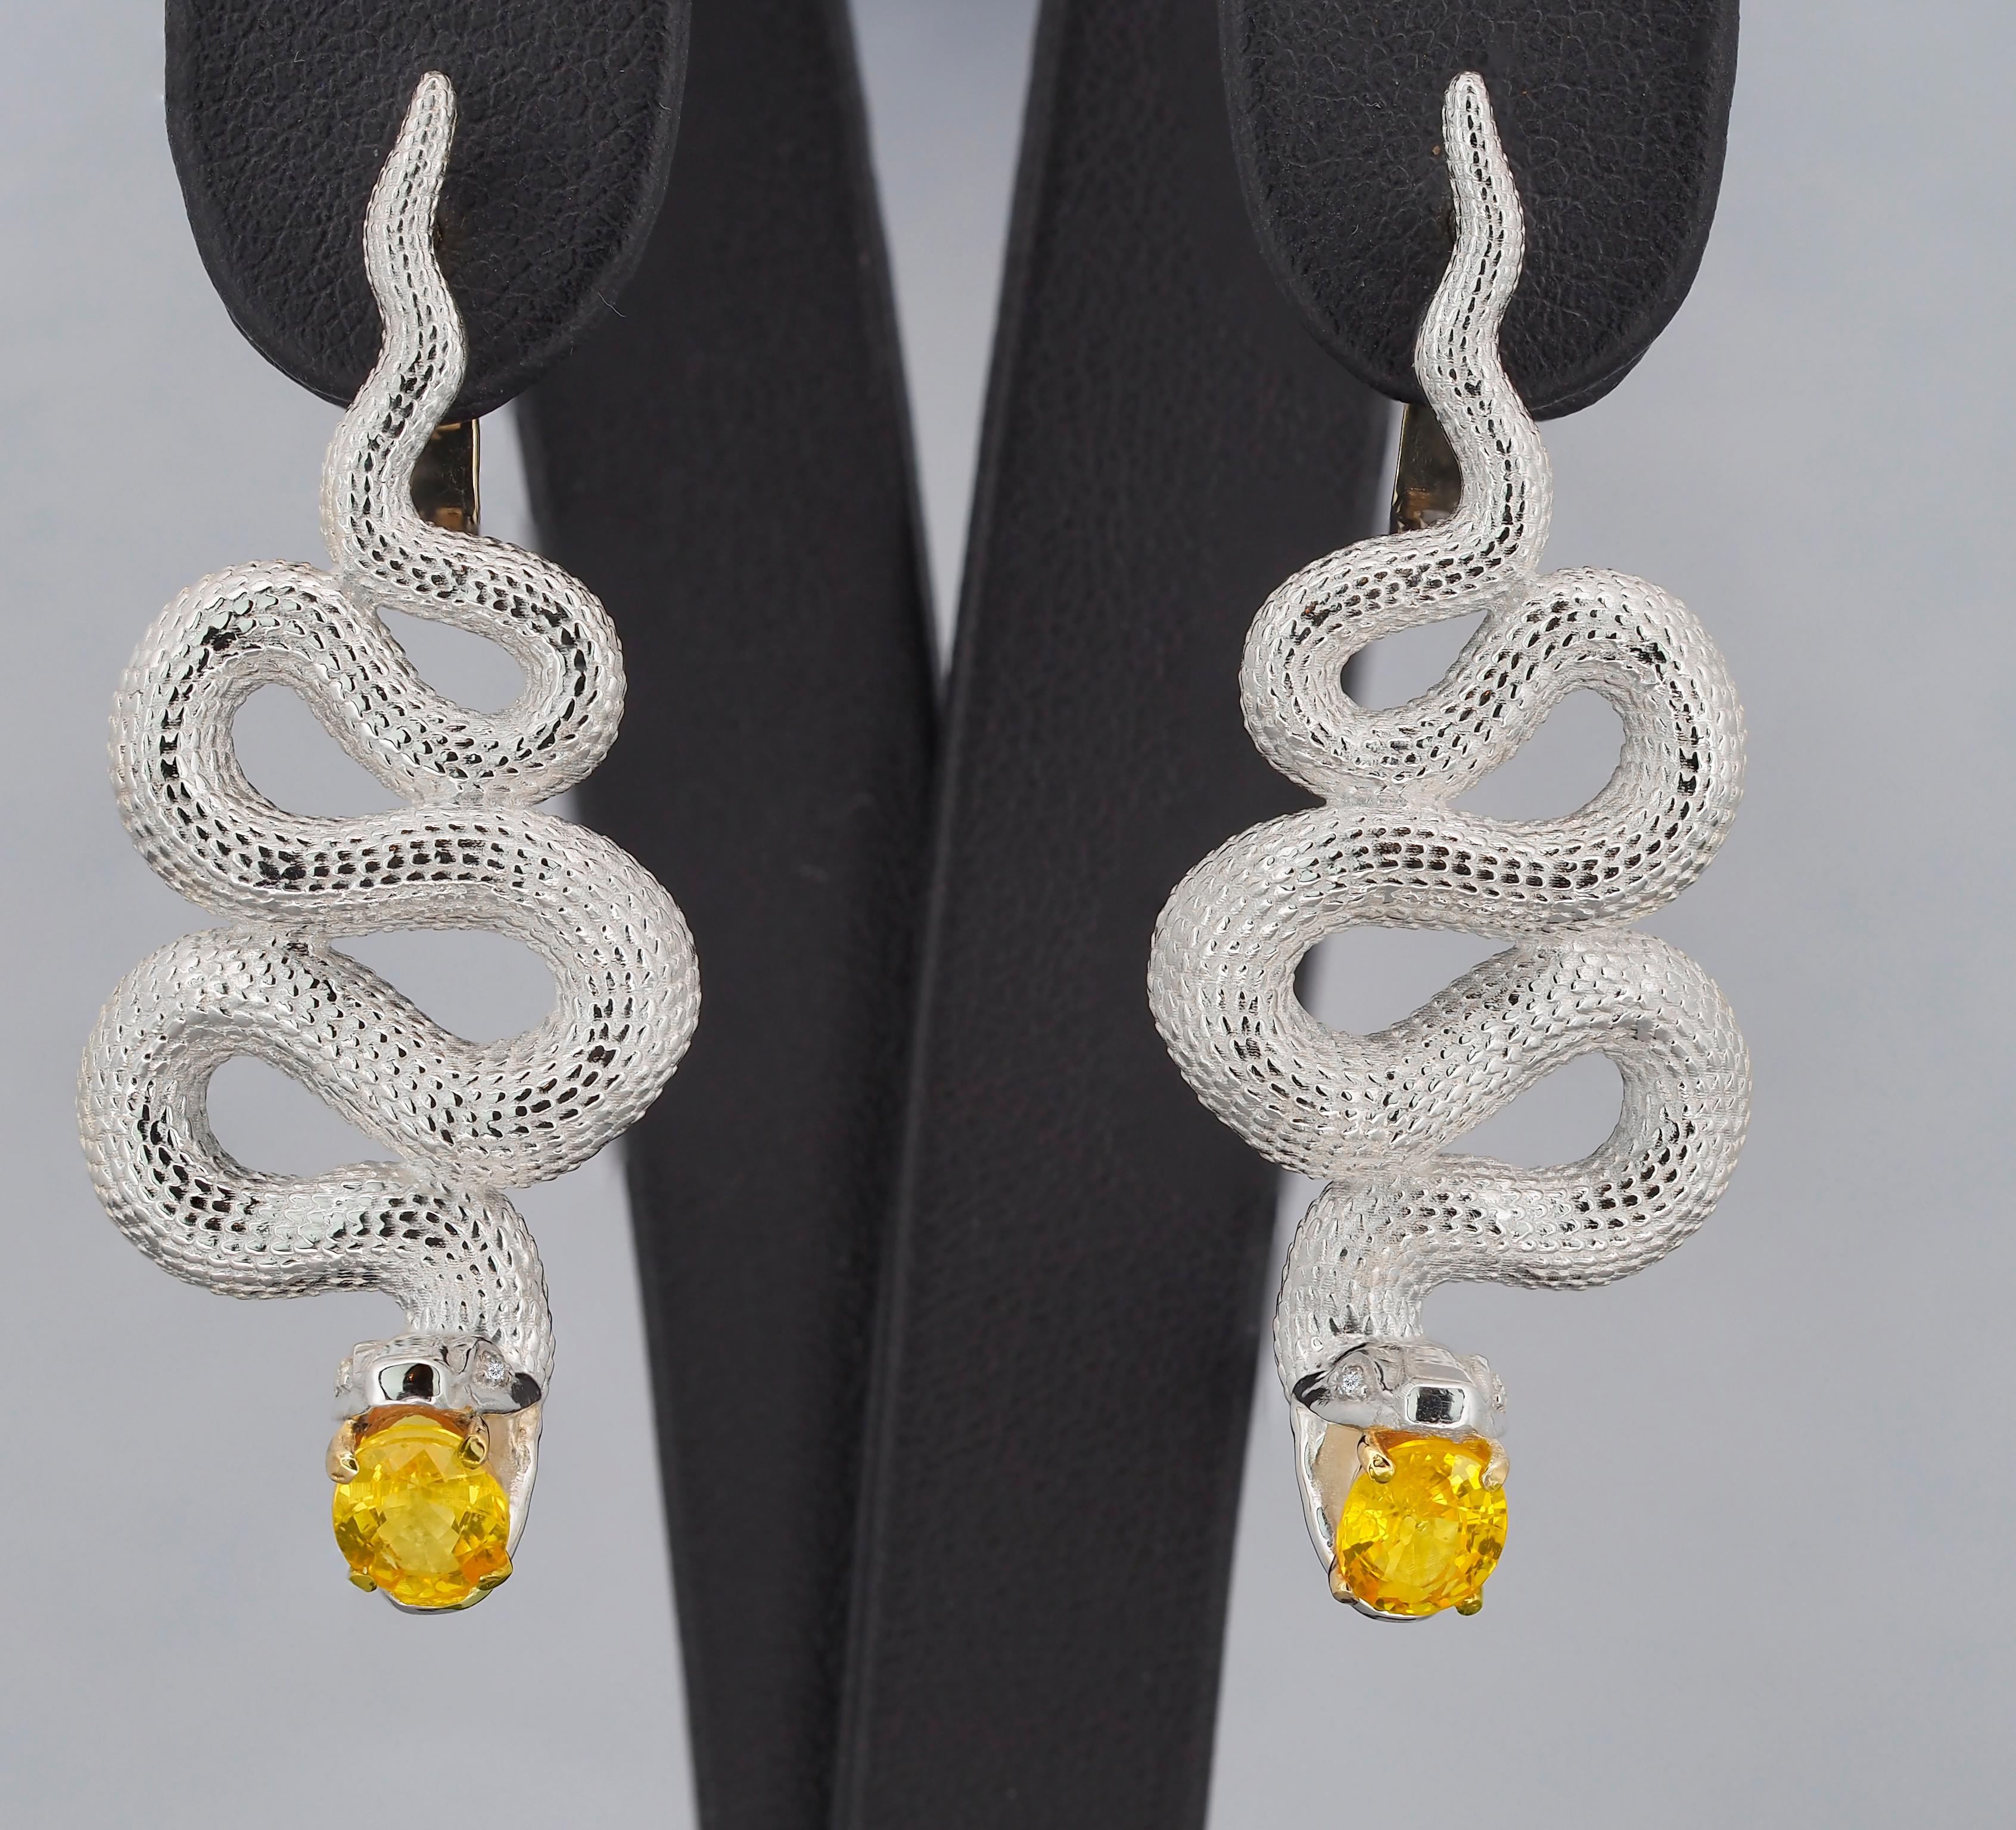 Massive Snake earrings with natural sapphires in opened mouth and diamonds in eyes. September birthstone. Earrings are made with two material: 14 kt solid yellow gold (1.3 g.) - clasp and 925 purity silver - other parts - 12 g.
Total weight: 13.3